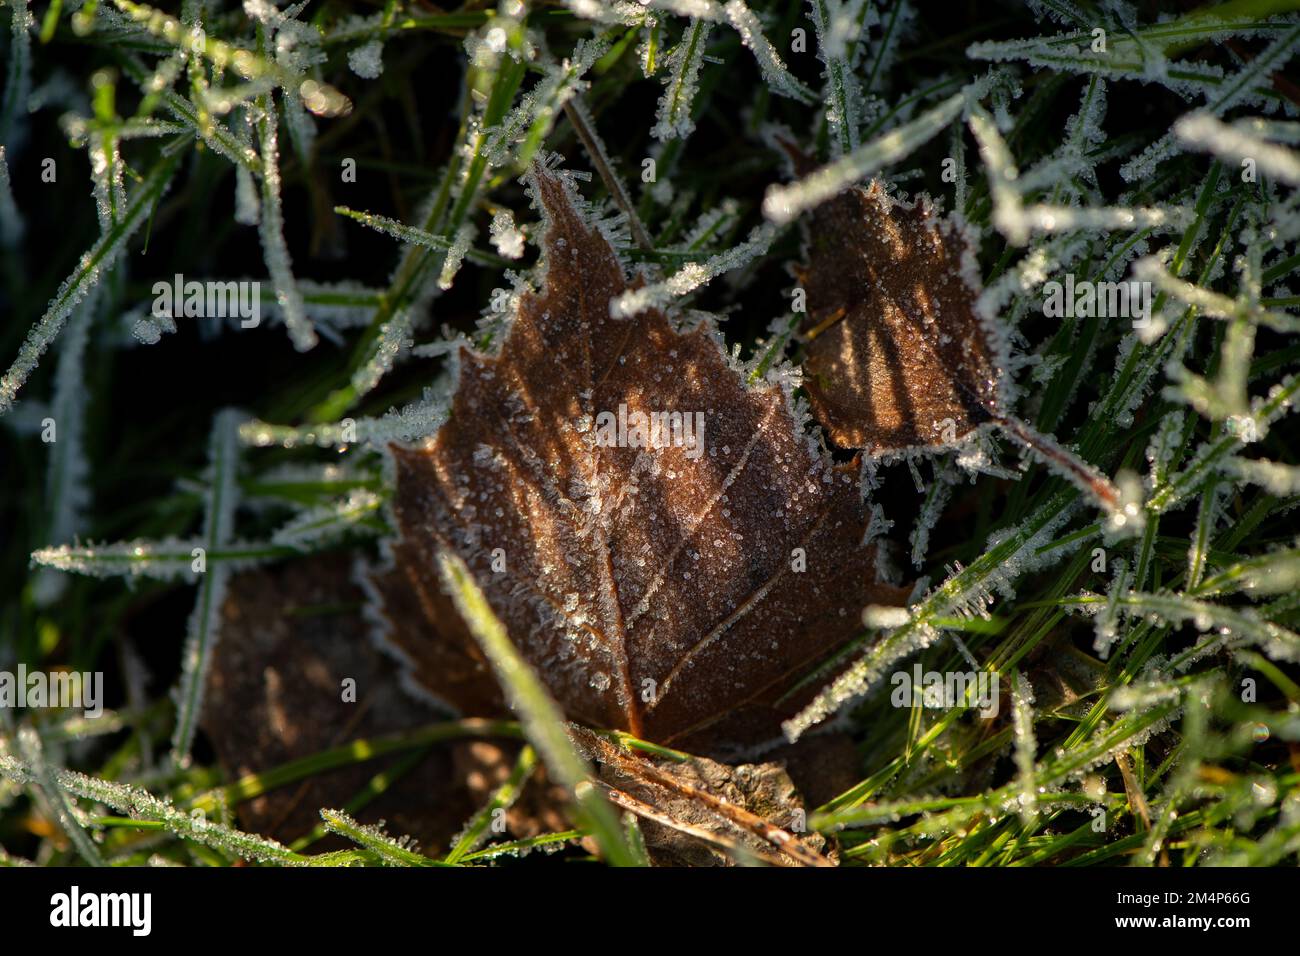 Frozen birch leaves stood up in the long grass catching the winter sunlight creating shadow patterns on the leaf amongst the ice covered grass. Stock Photo